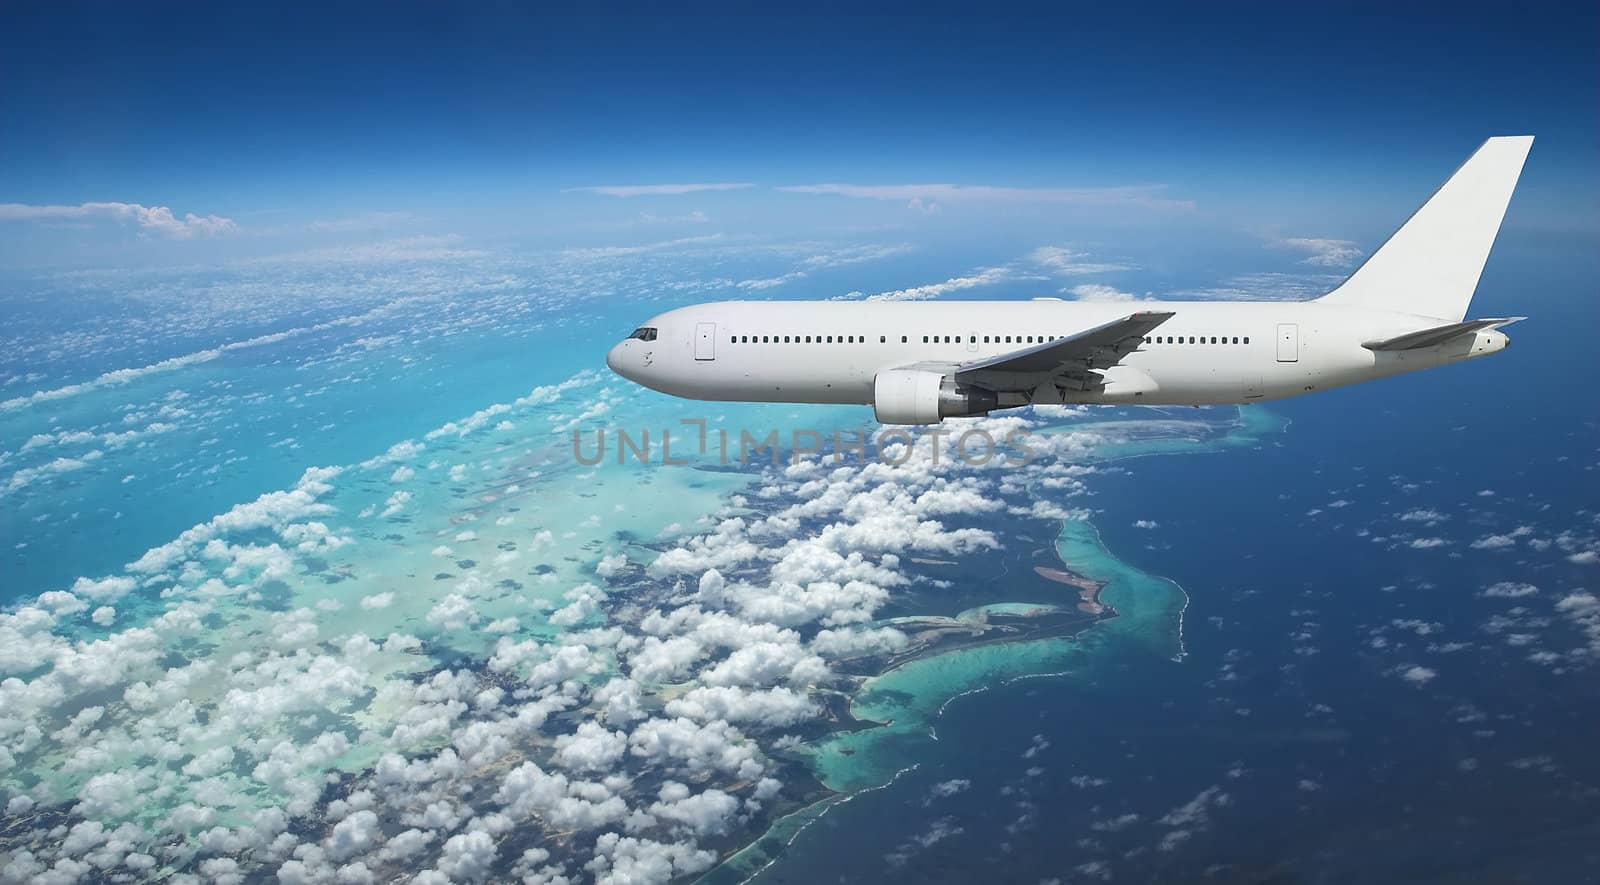 Large airliner arriving over exotic vacation destination